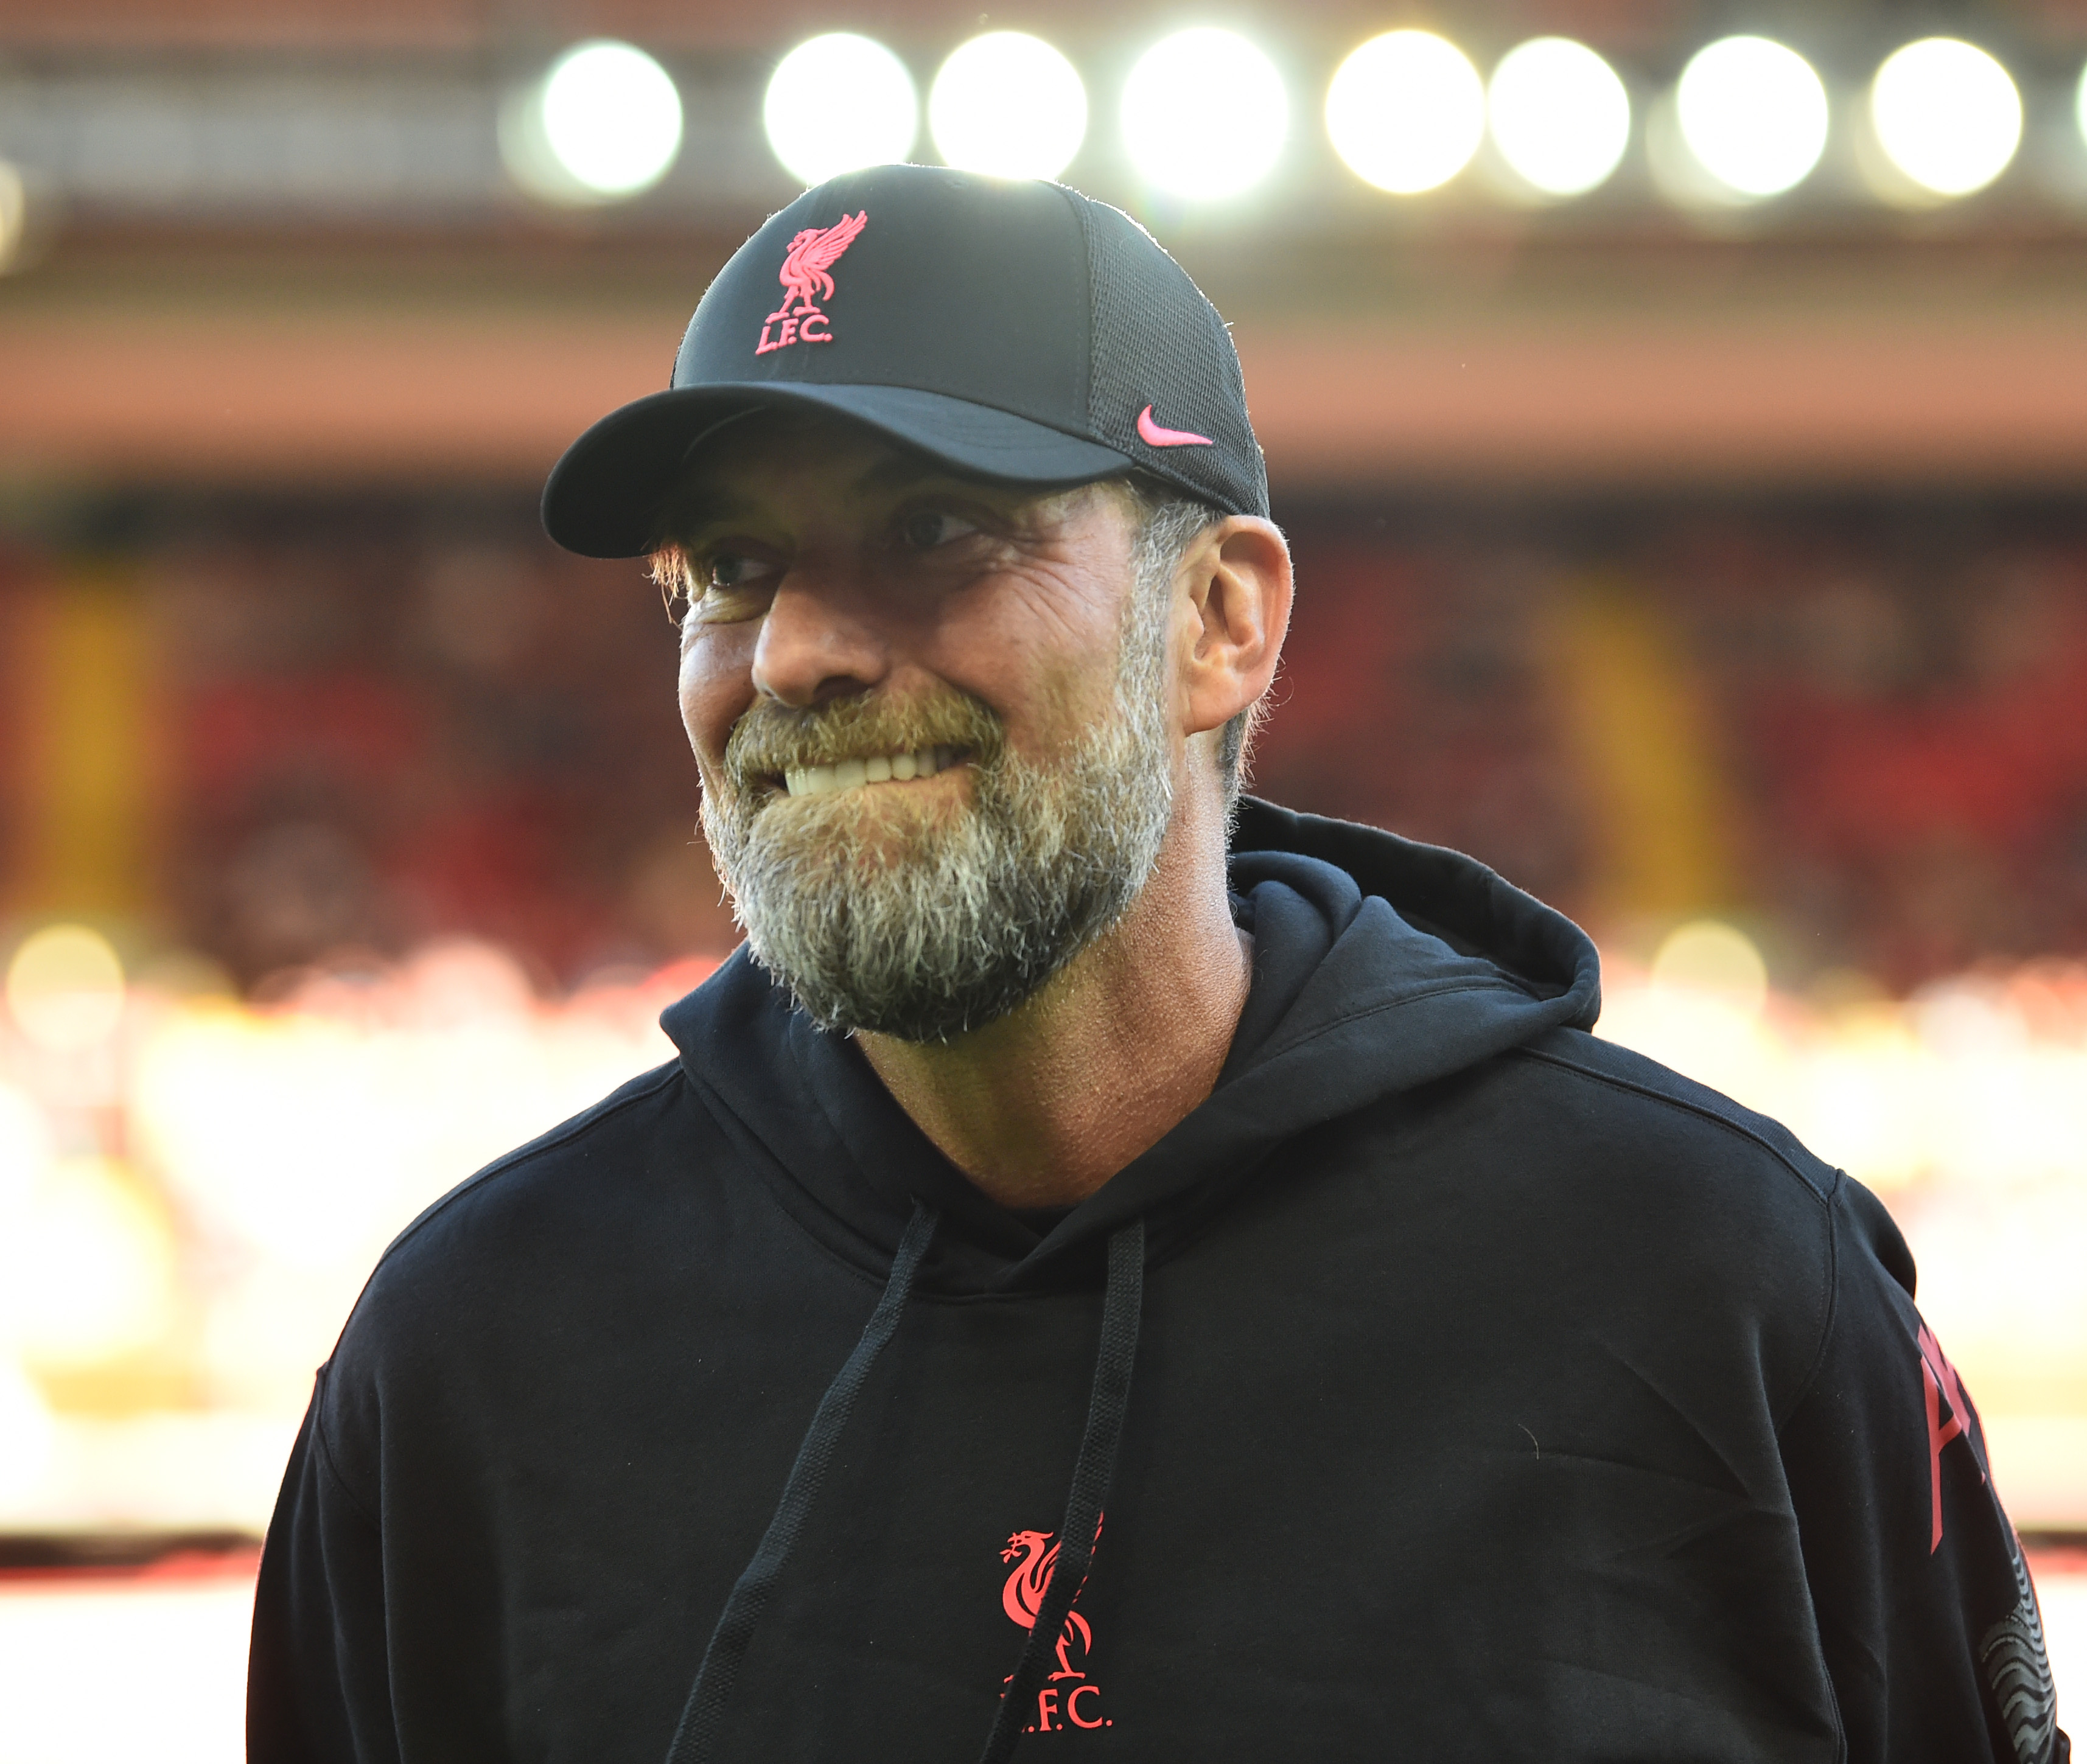 Jurgen Klopp manager of Liverpool at Anfield on July 31, 2022 in Liverpool, England.